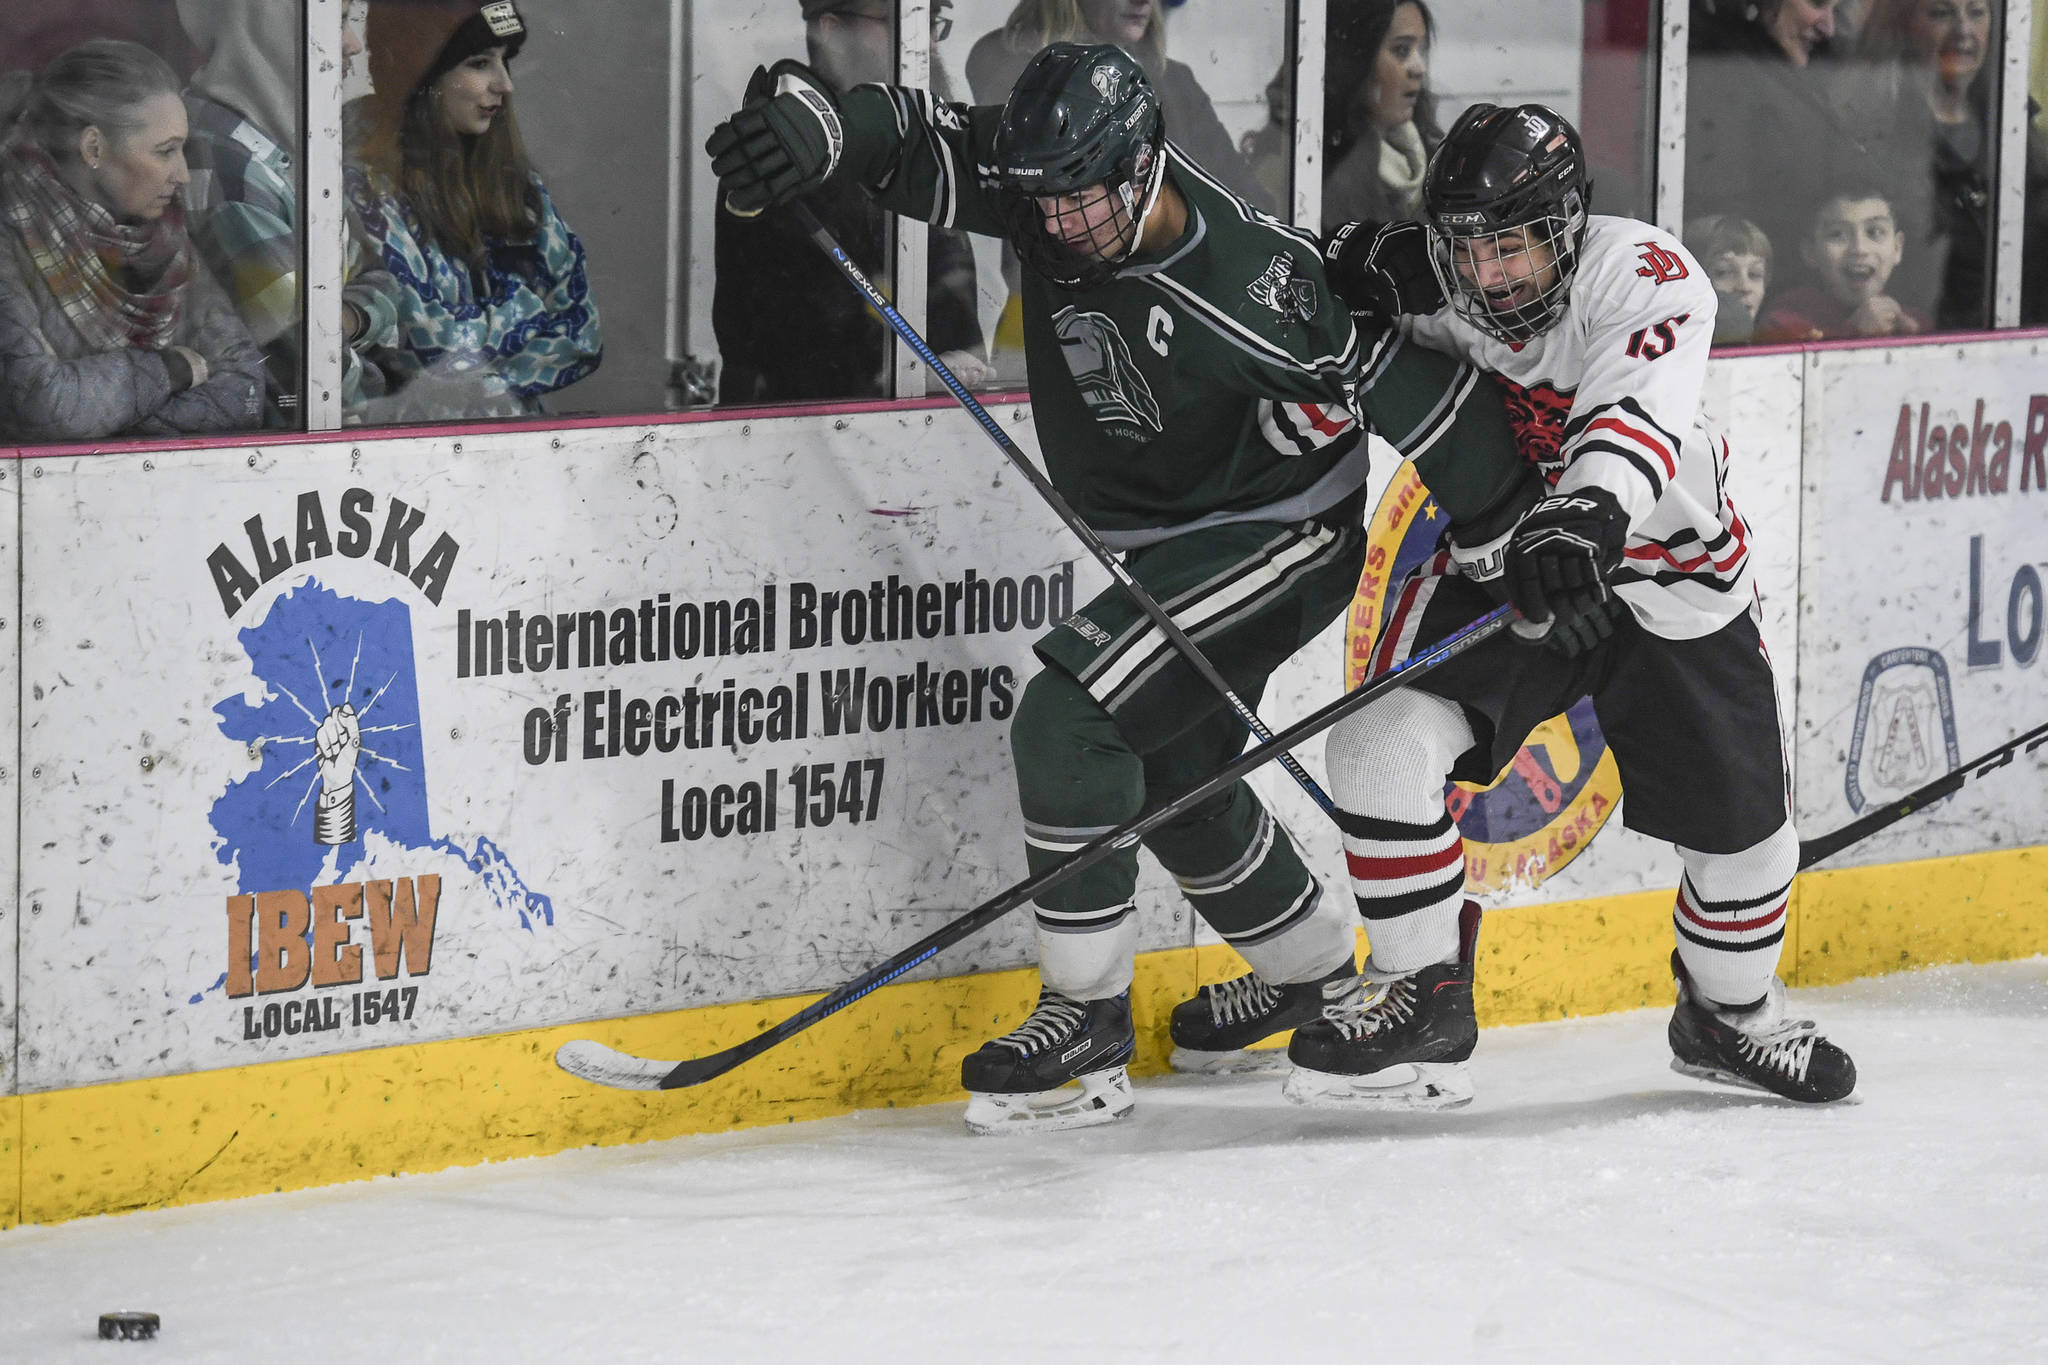 Juneau-Douglas’ Josh Frisby, right, competes against Colony’s Blake Reid for the puck at Treadwell Arena on Friday, Nov. 22, 2019. (Michael Penn | Juneau Empire)